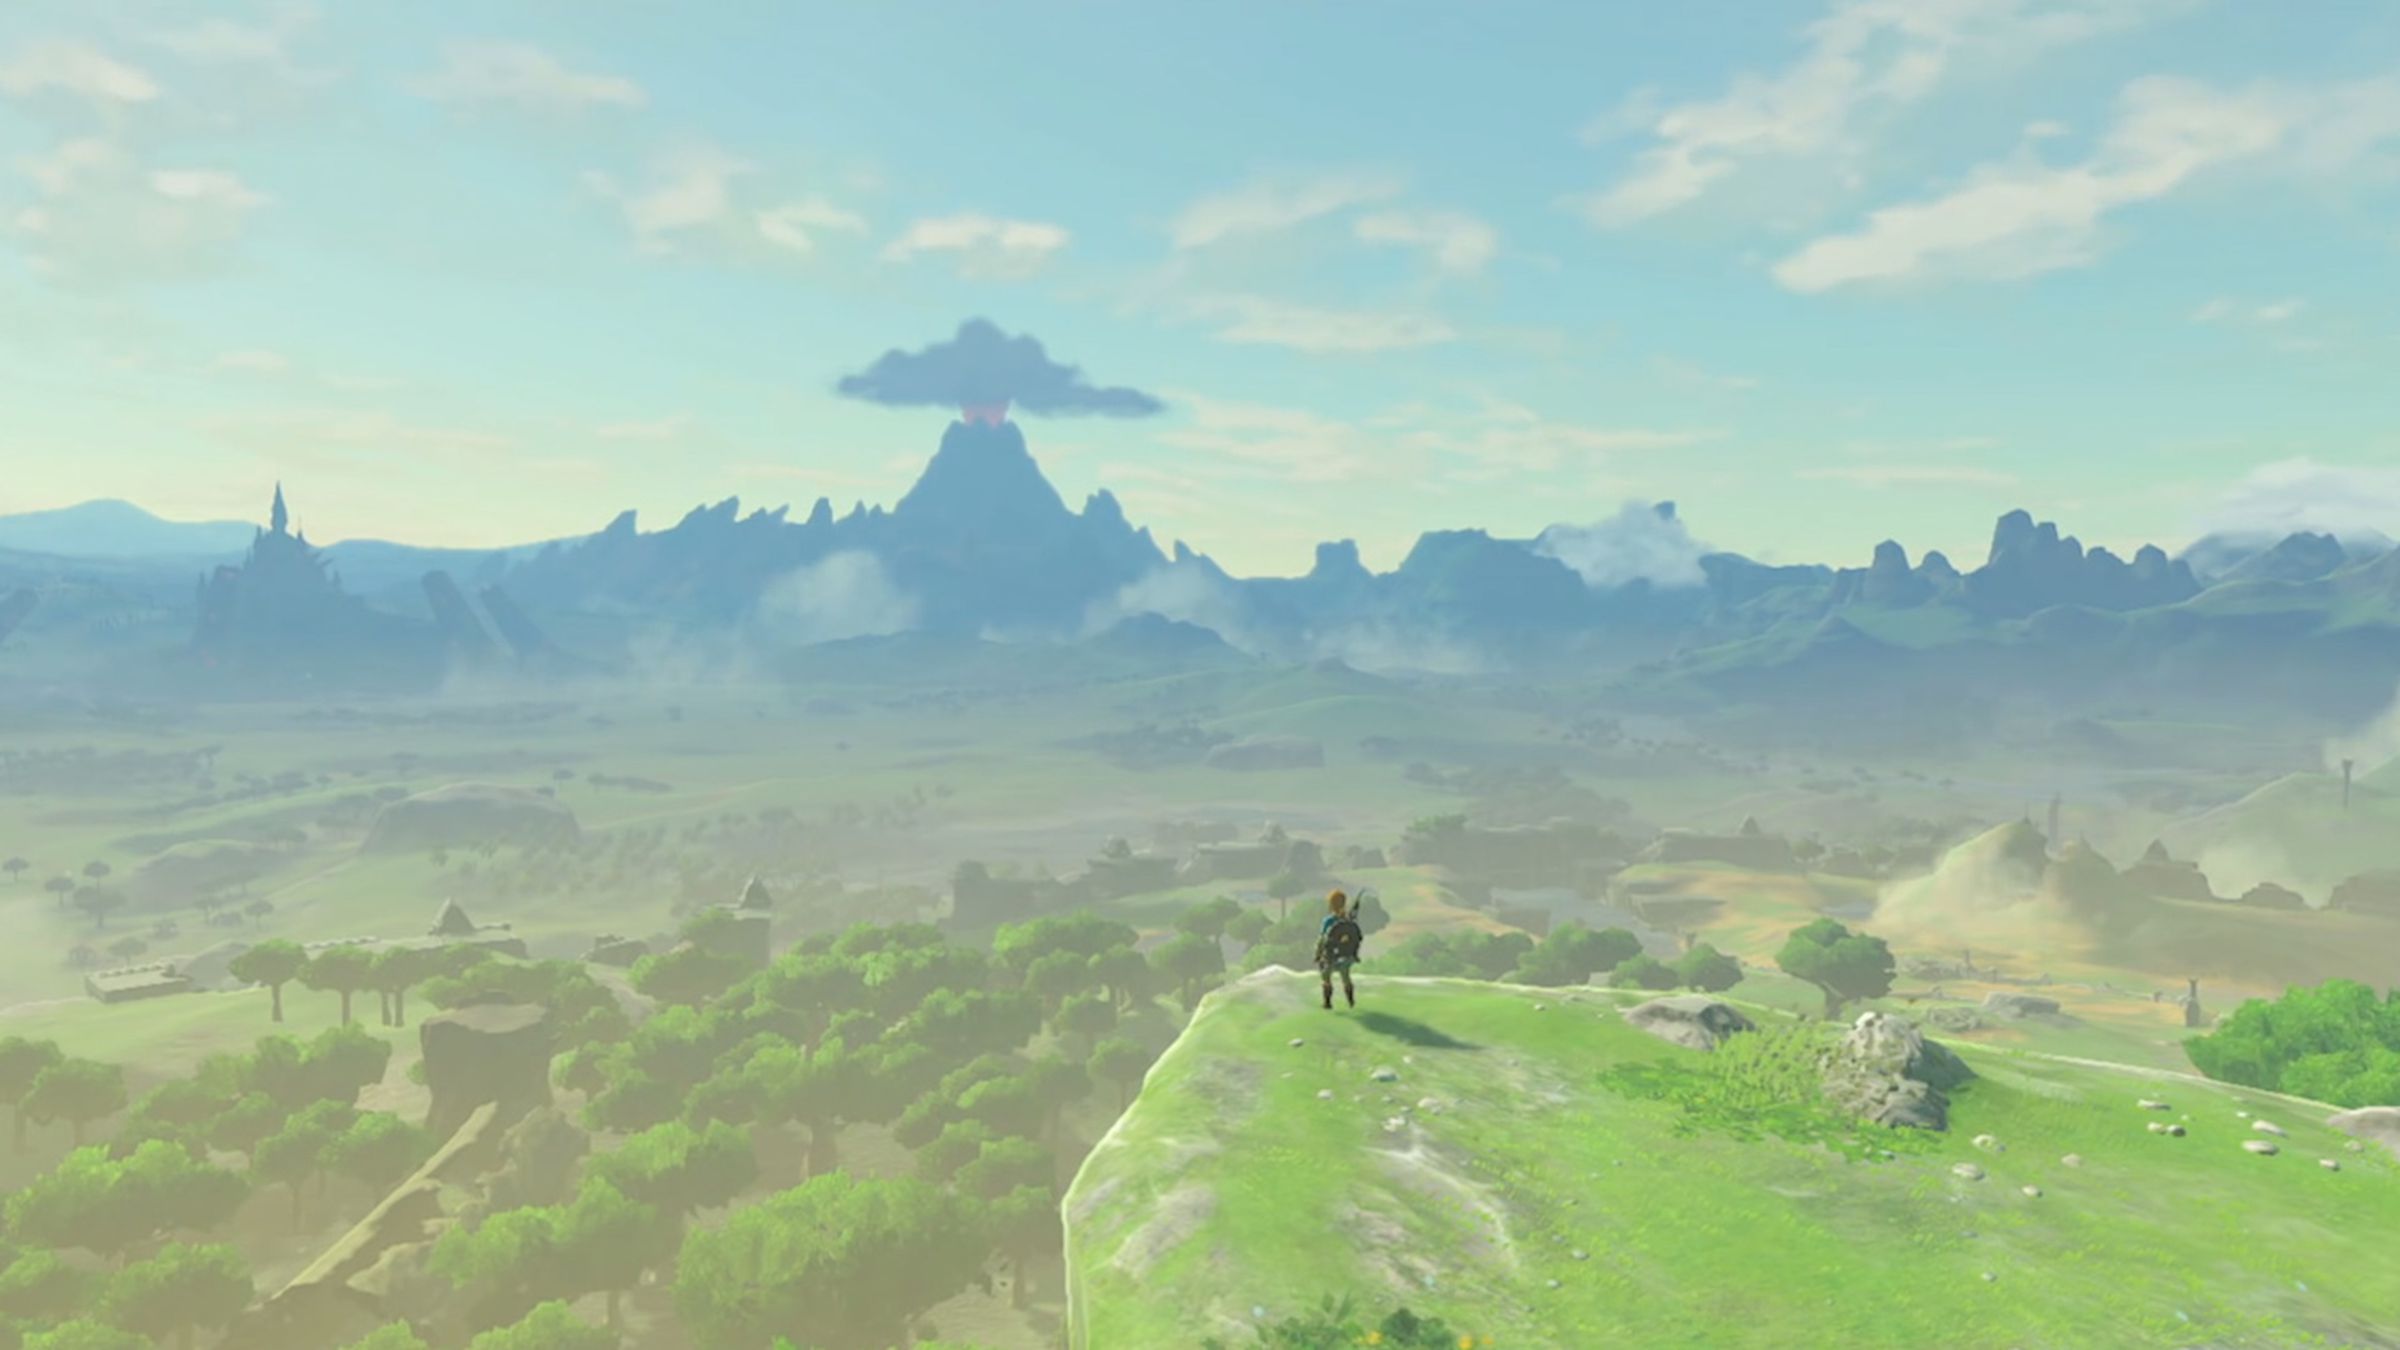 The Legend of Zelda: Breath of the Wild redefined what an open-world game could be.